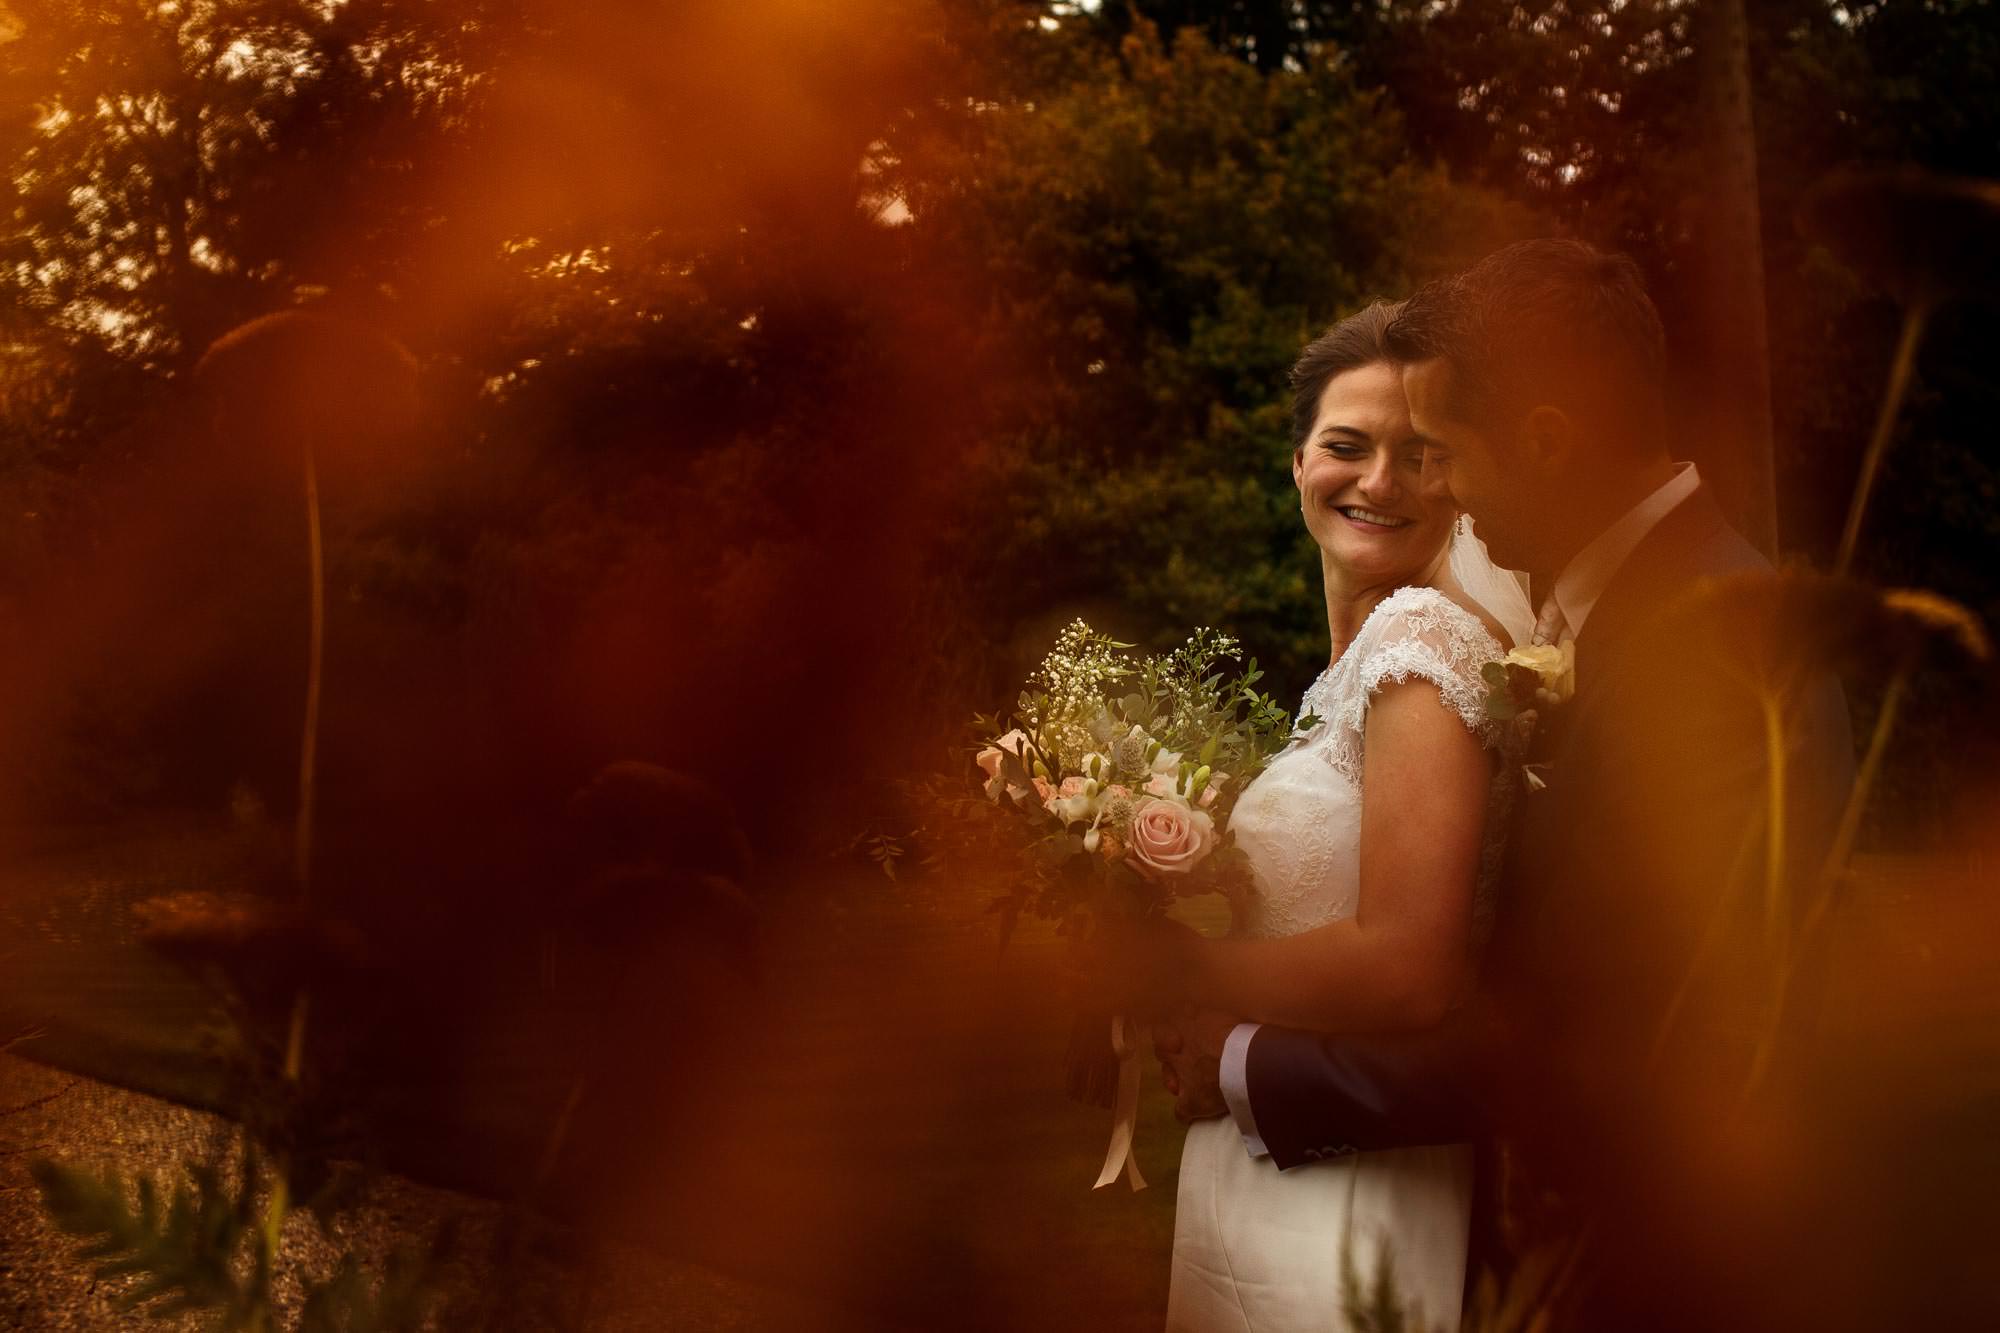 Bride and groom portrait in the gardens at Iscoyd Park